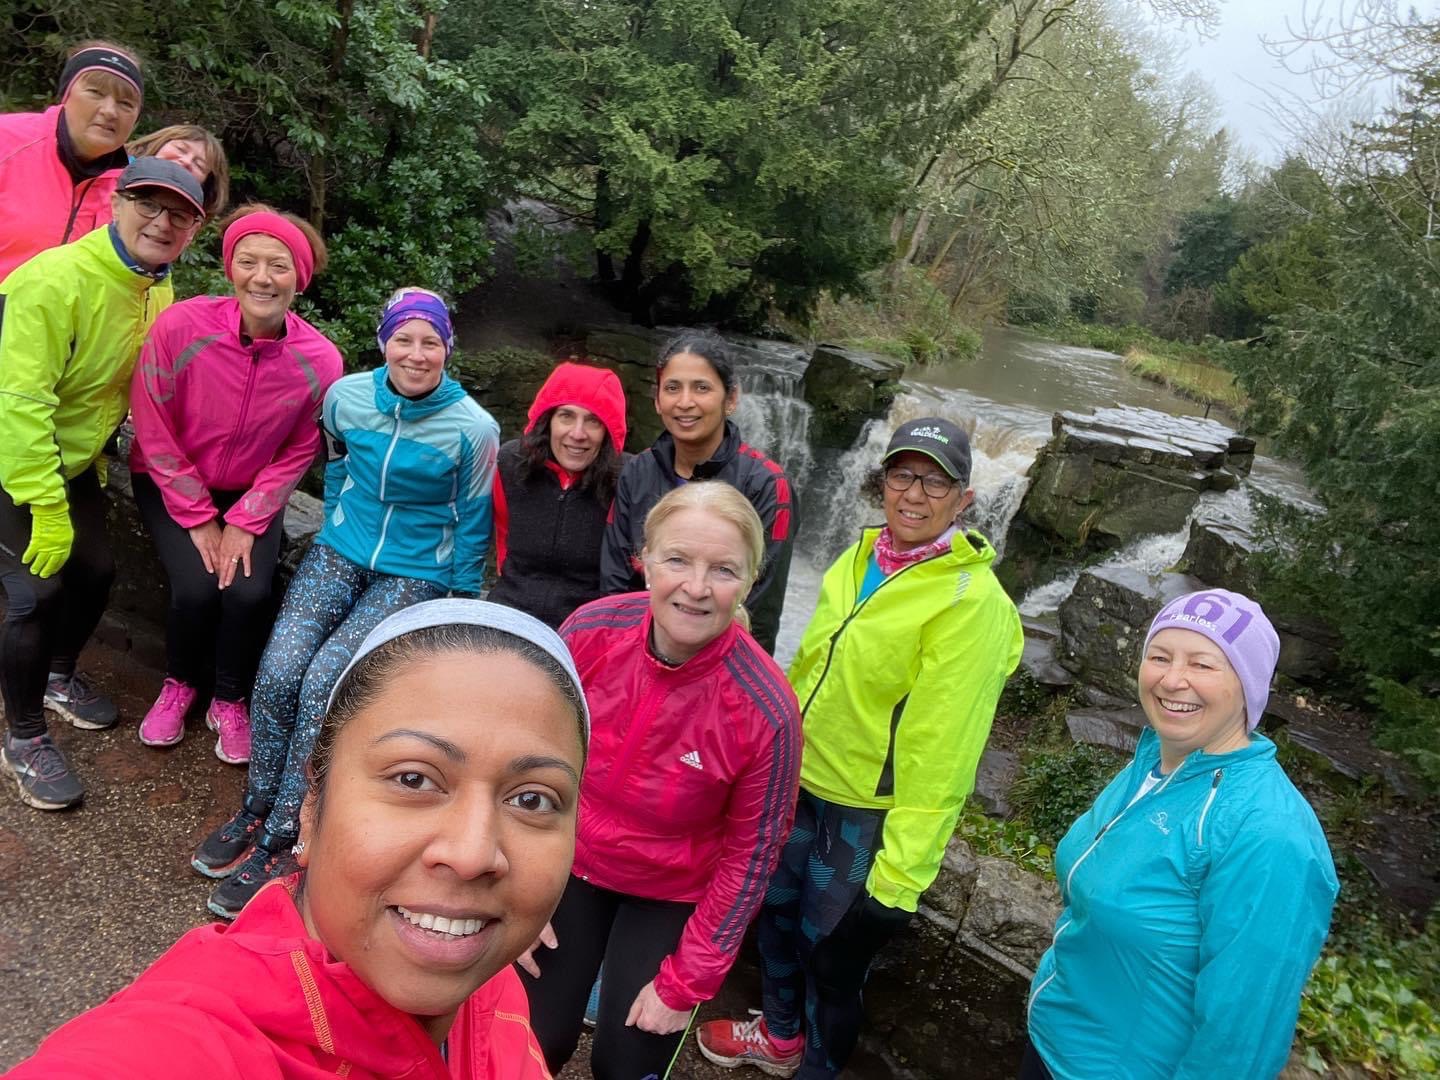 Selfie of a 261 Fearless women's running group in front of a picturesque waterfall, wearing colourful rain jackets, showing their solidarity and adventurous spirit